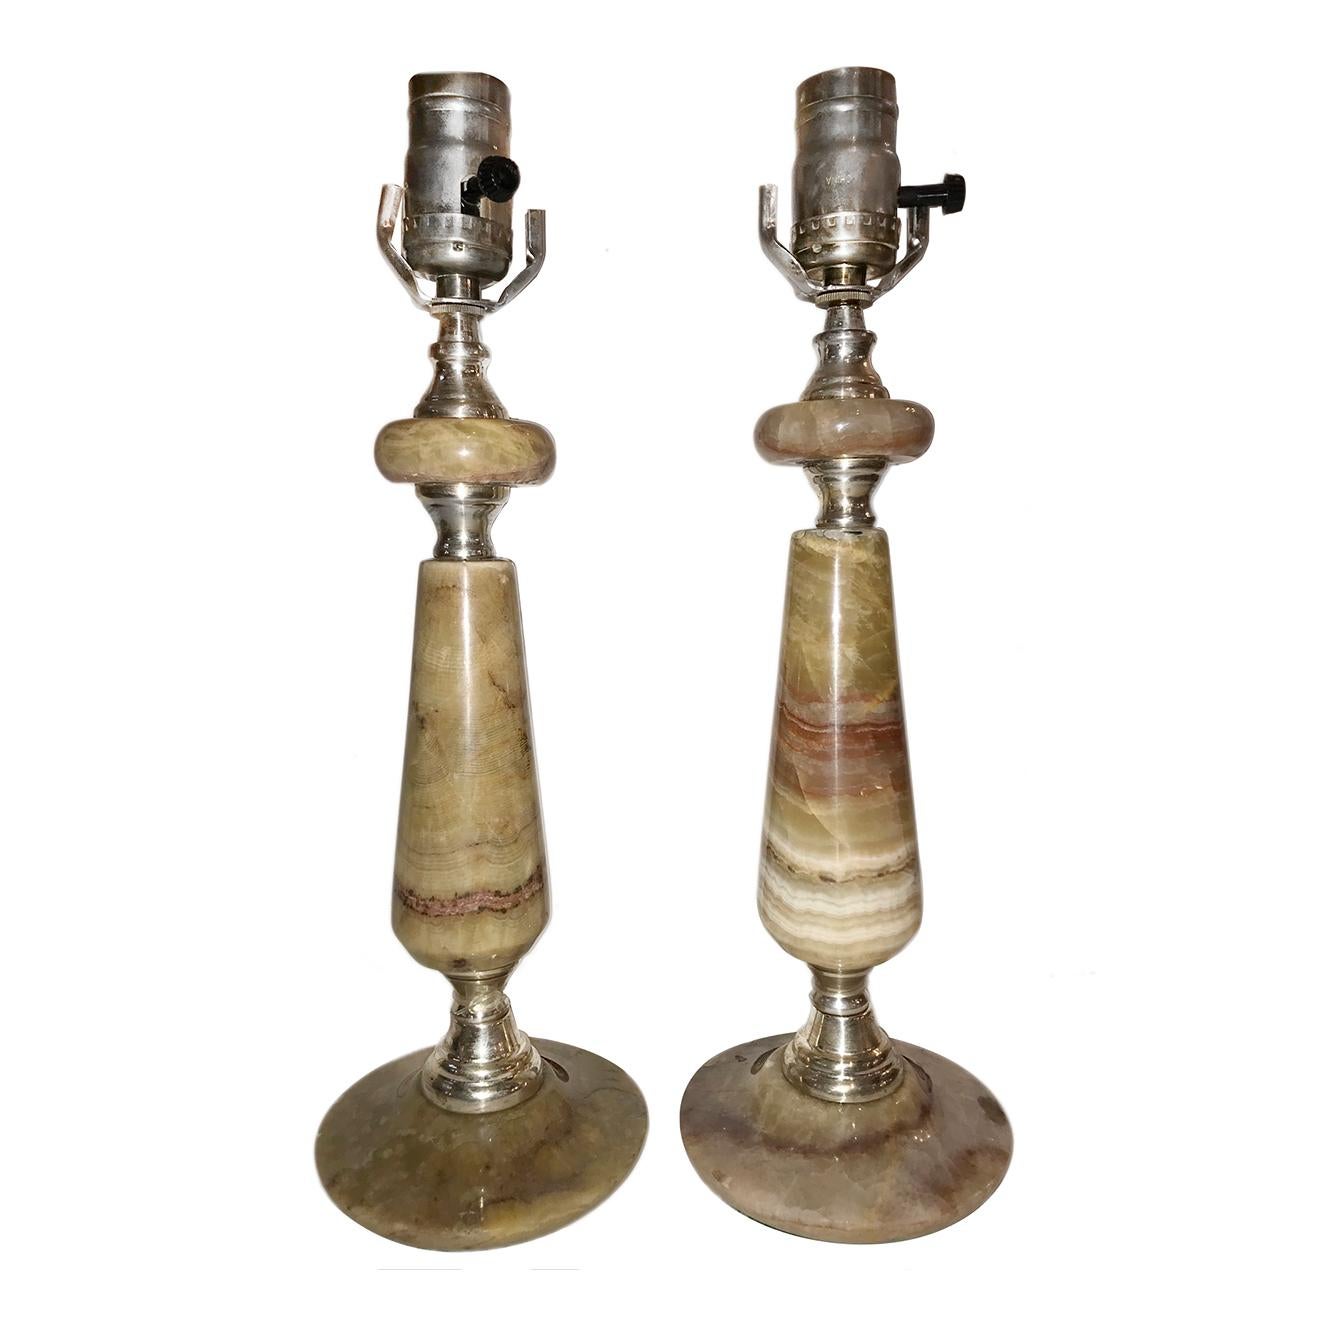 A pair of circa 1940s Italian striped onyx table lamps with silver hardware. 

Measurement:
Height of body 11.5